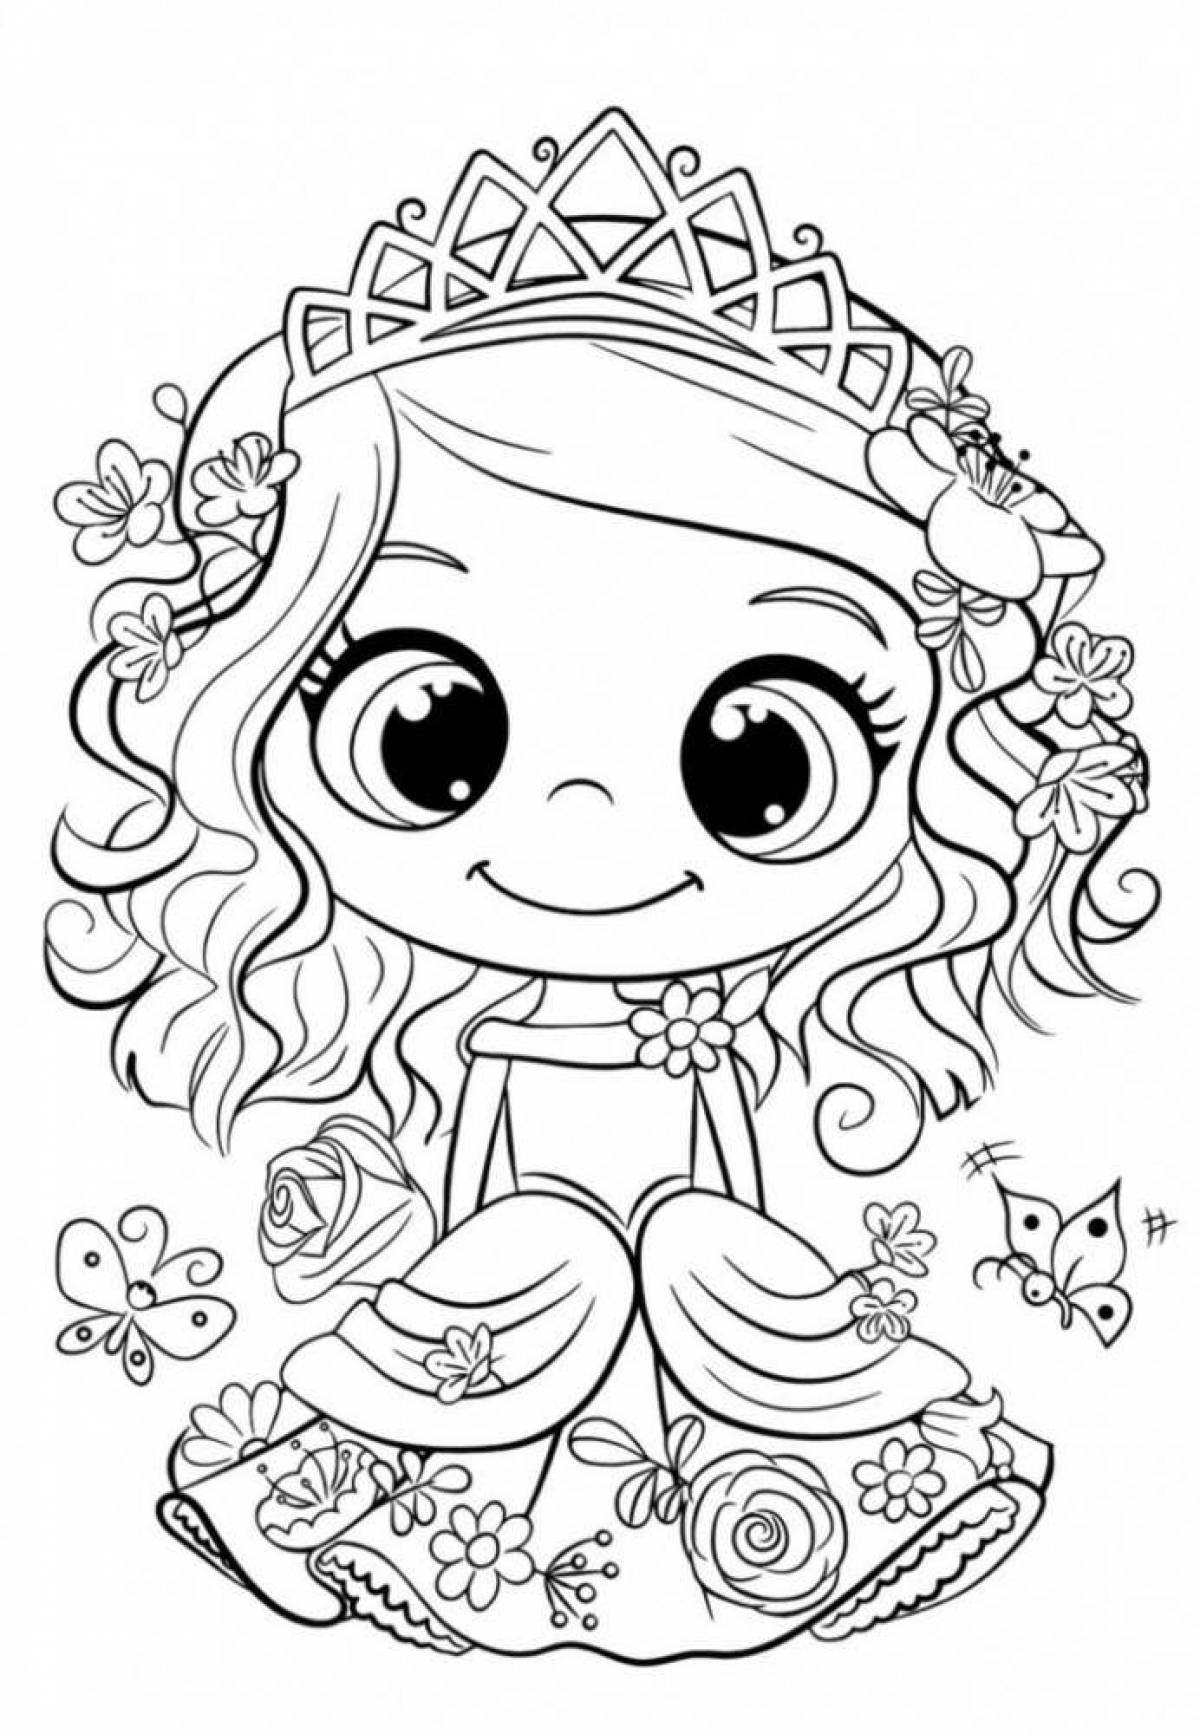 Shine coloring princess with a crown